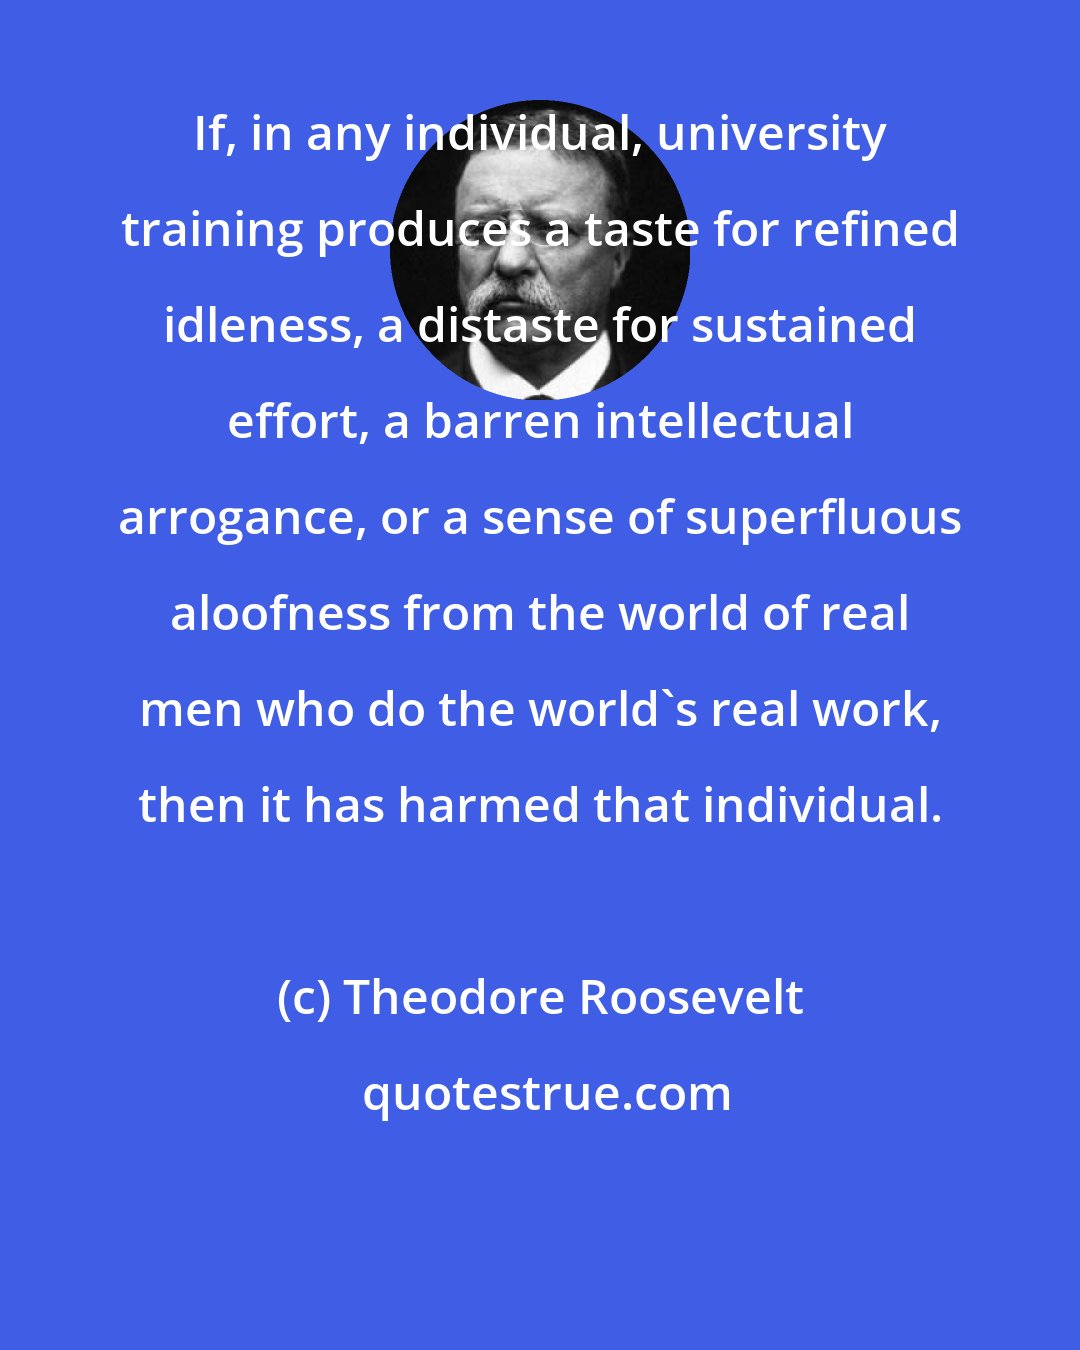 Theodore Roosevelt: If, in any individual, university training produces a taste for refined idleness, a distaste for sustained effort, a barren intellectual arrogance, or a sense of superfluous aloofness from the world of real men who do the world's real work, then it has harmed that individual.